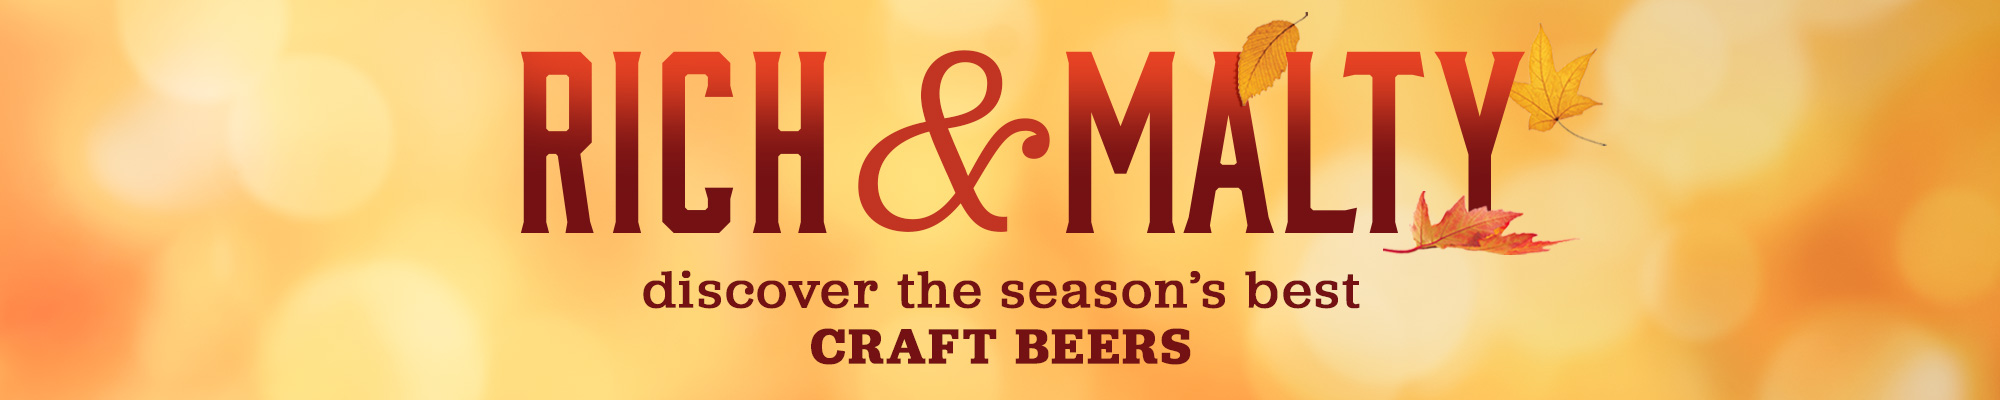 Rich & Malty - Discover the Season's Best Craft Beers